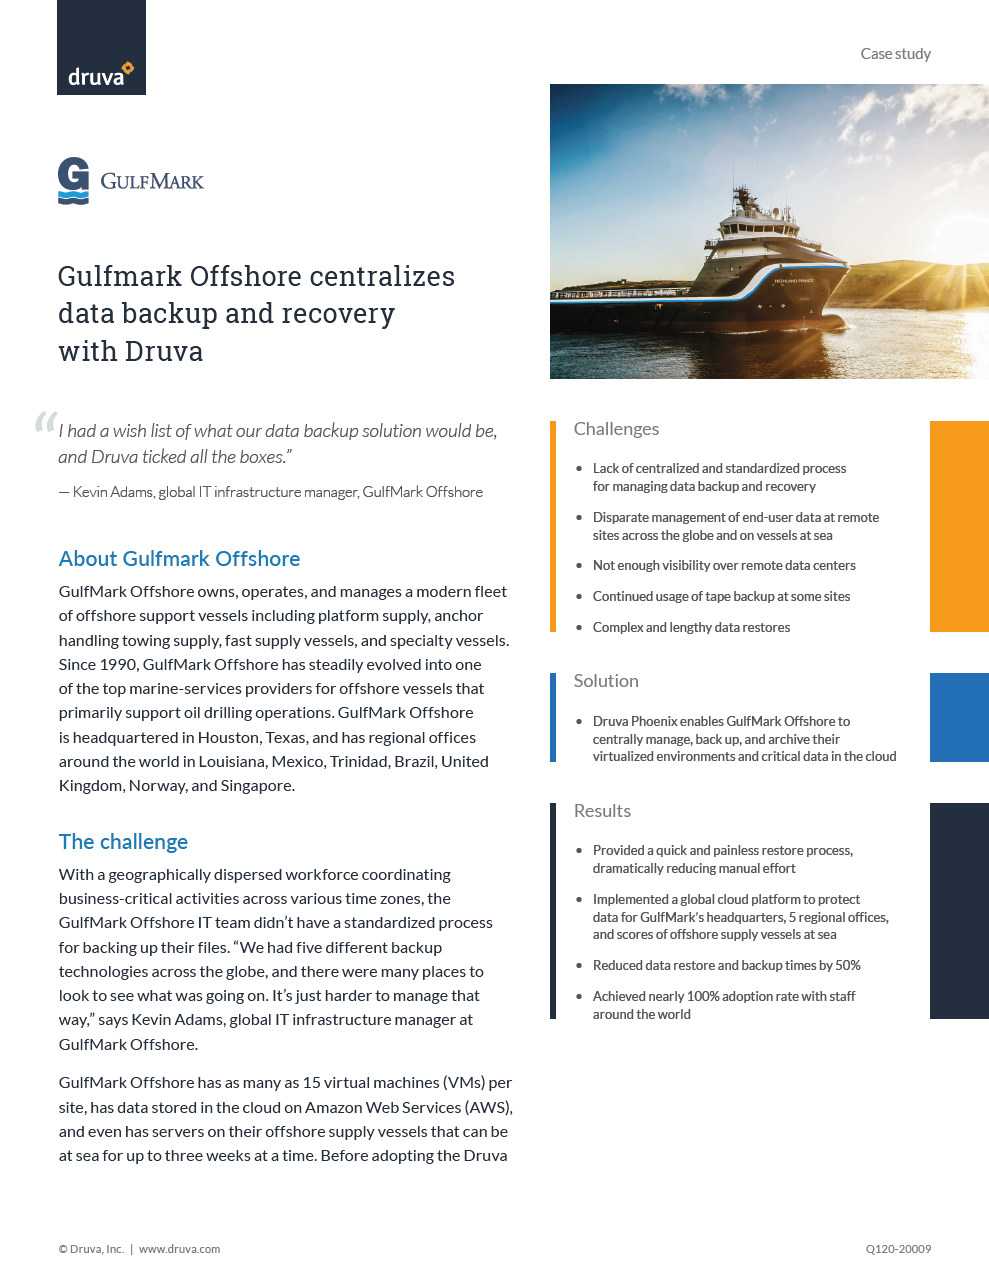 Gulfmark Offshore centralizes data backup and recovery with Druva